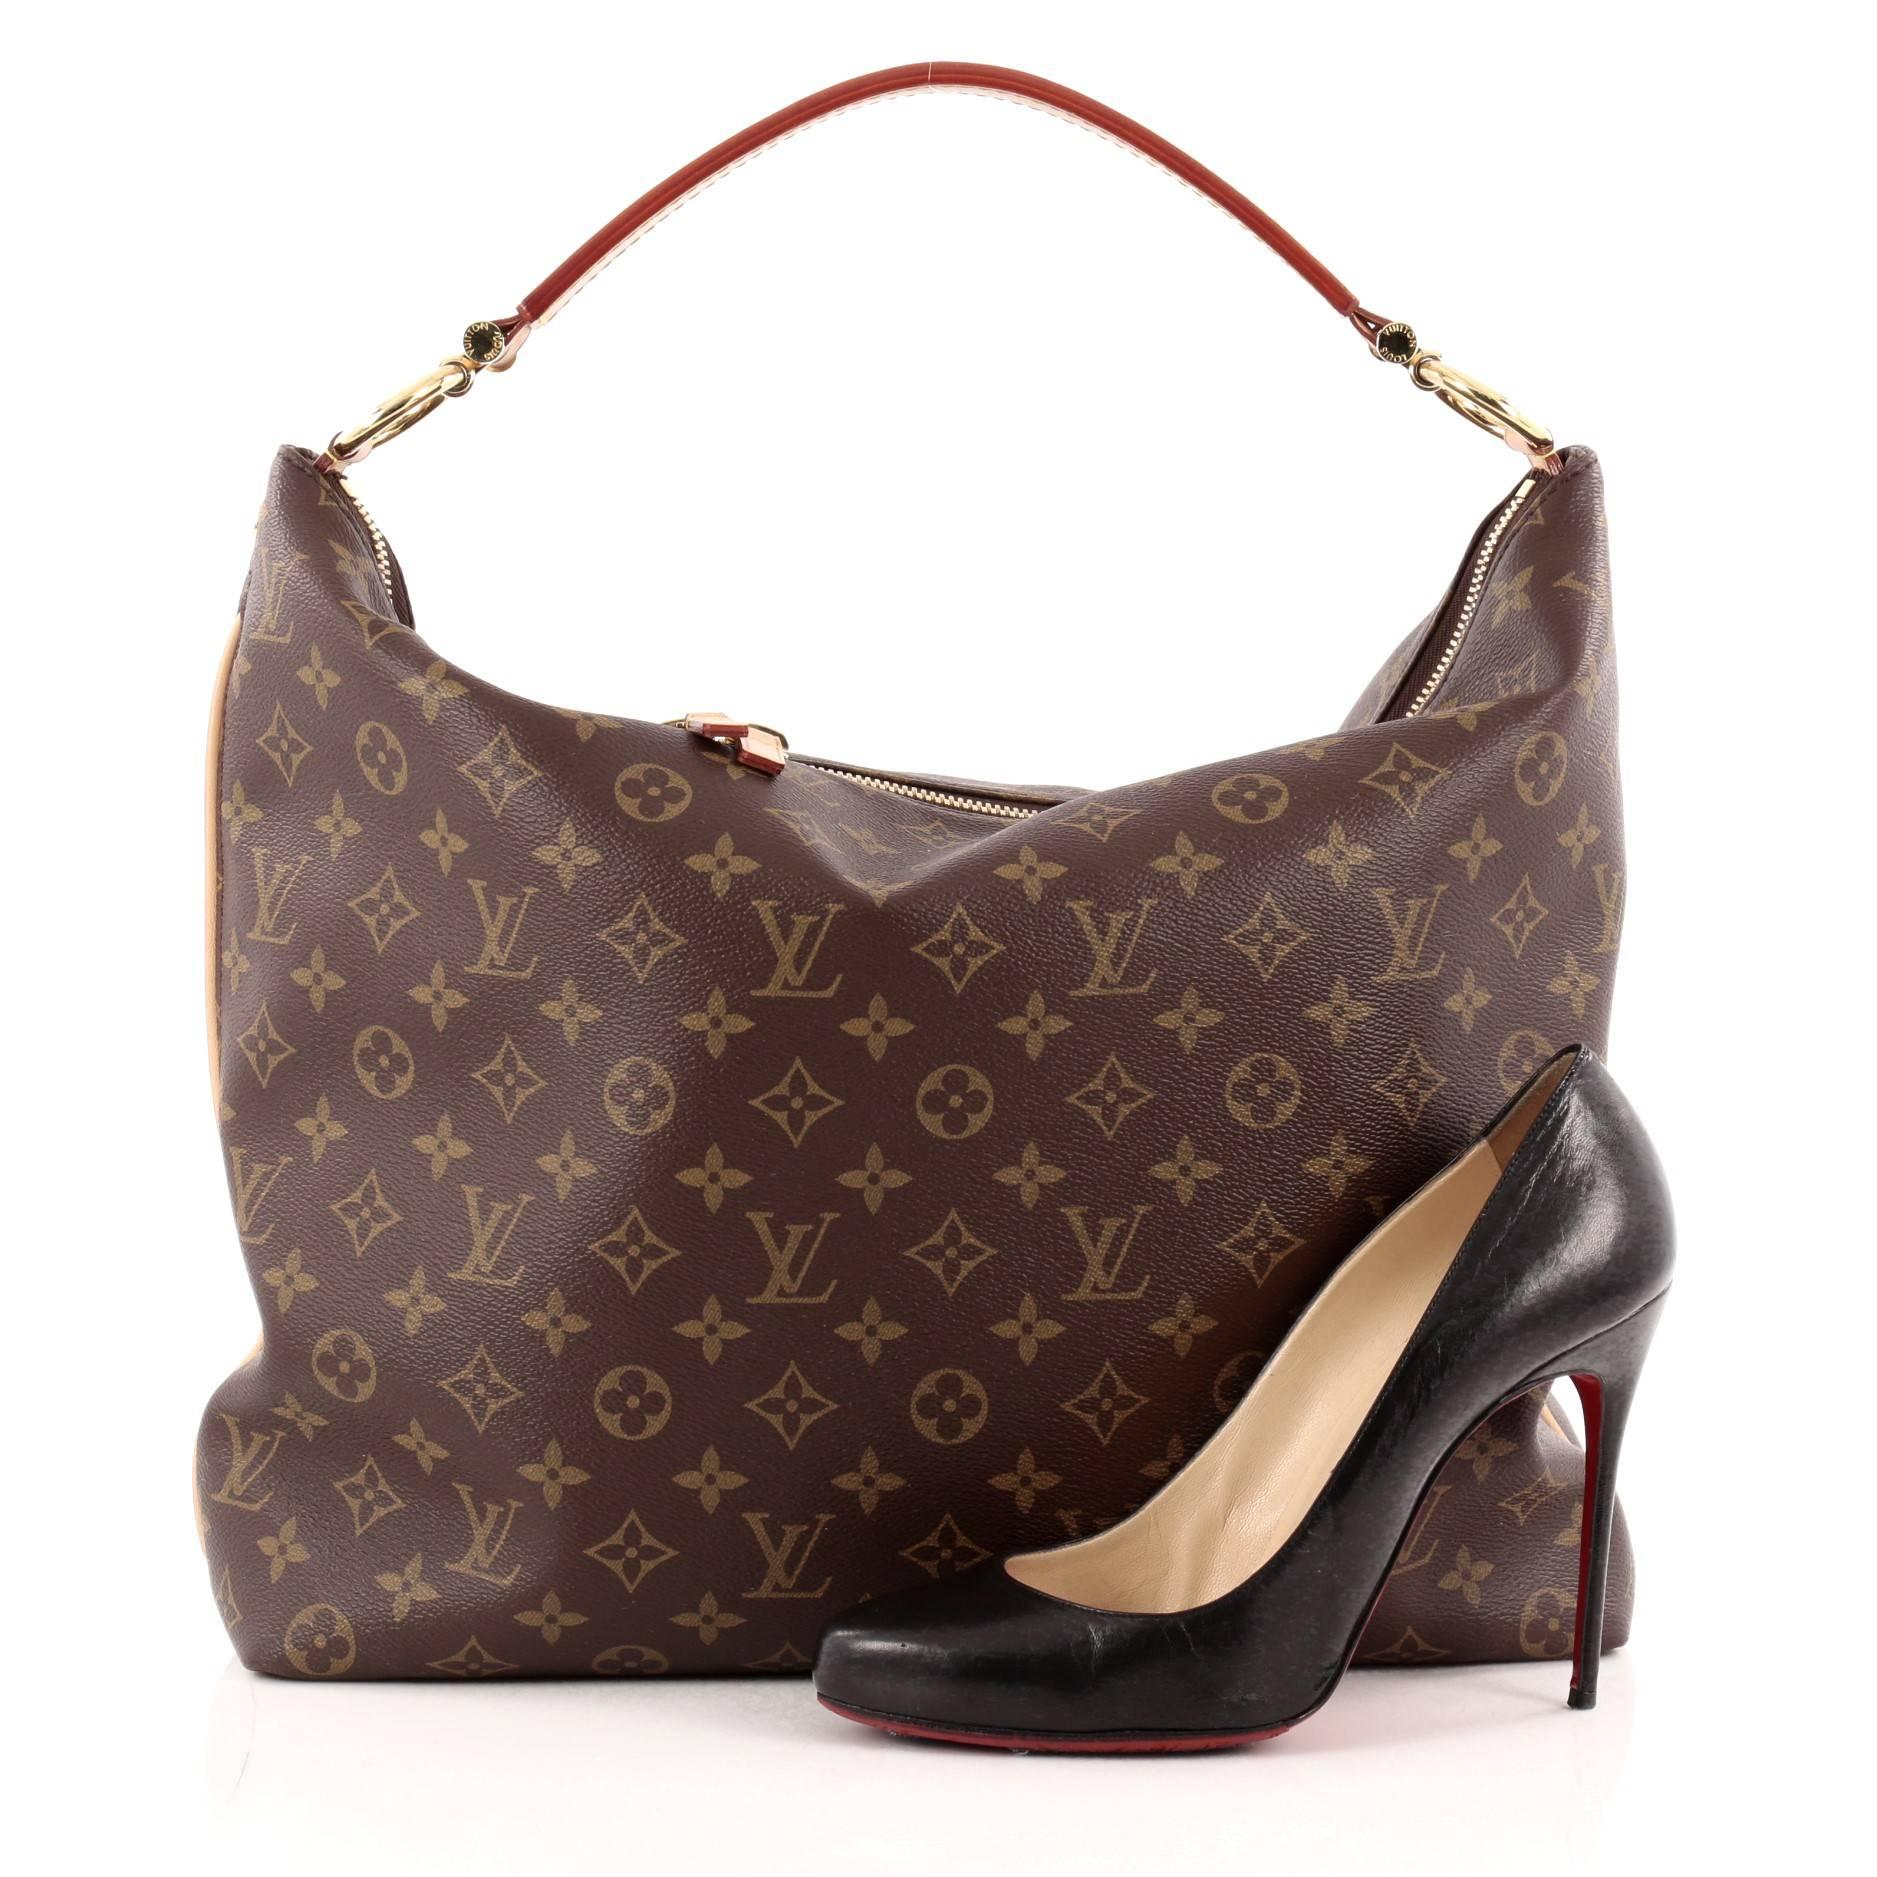 This authentic Louis Vuitton Sully Monogram Canvas MM mixes luxurious heritage style with a modern flair. Crafted in LV’s brown monogram coated canvas, this vintage-inspired hobo features a modern curved silhouette, thick vachetta cowhide looped